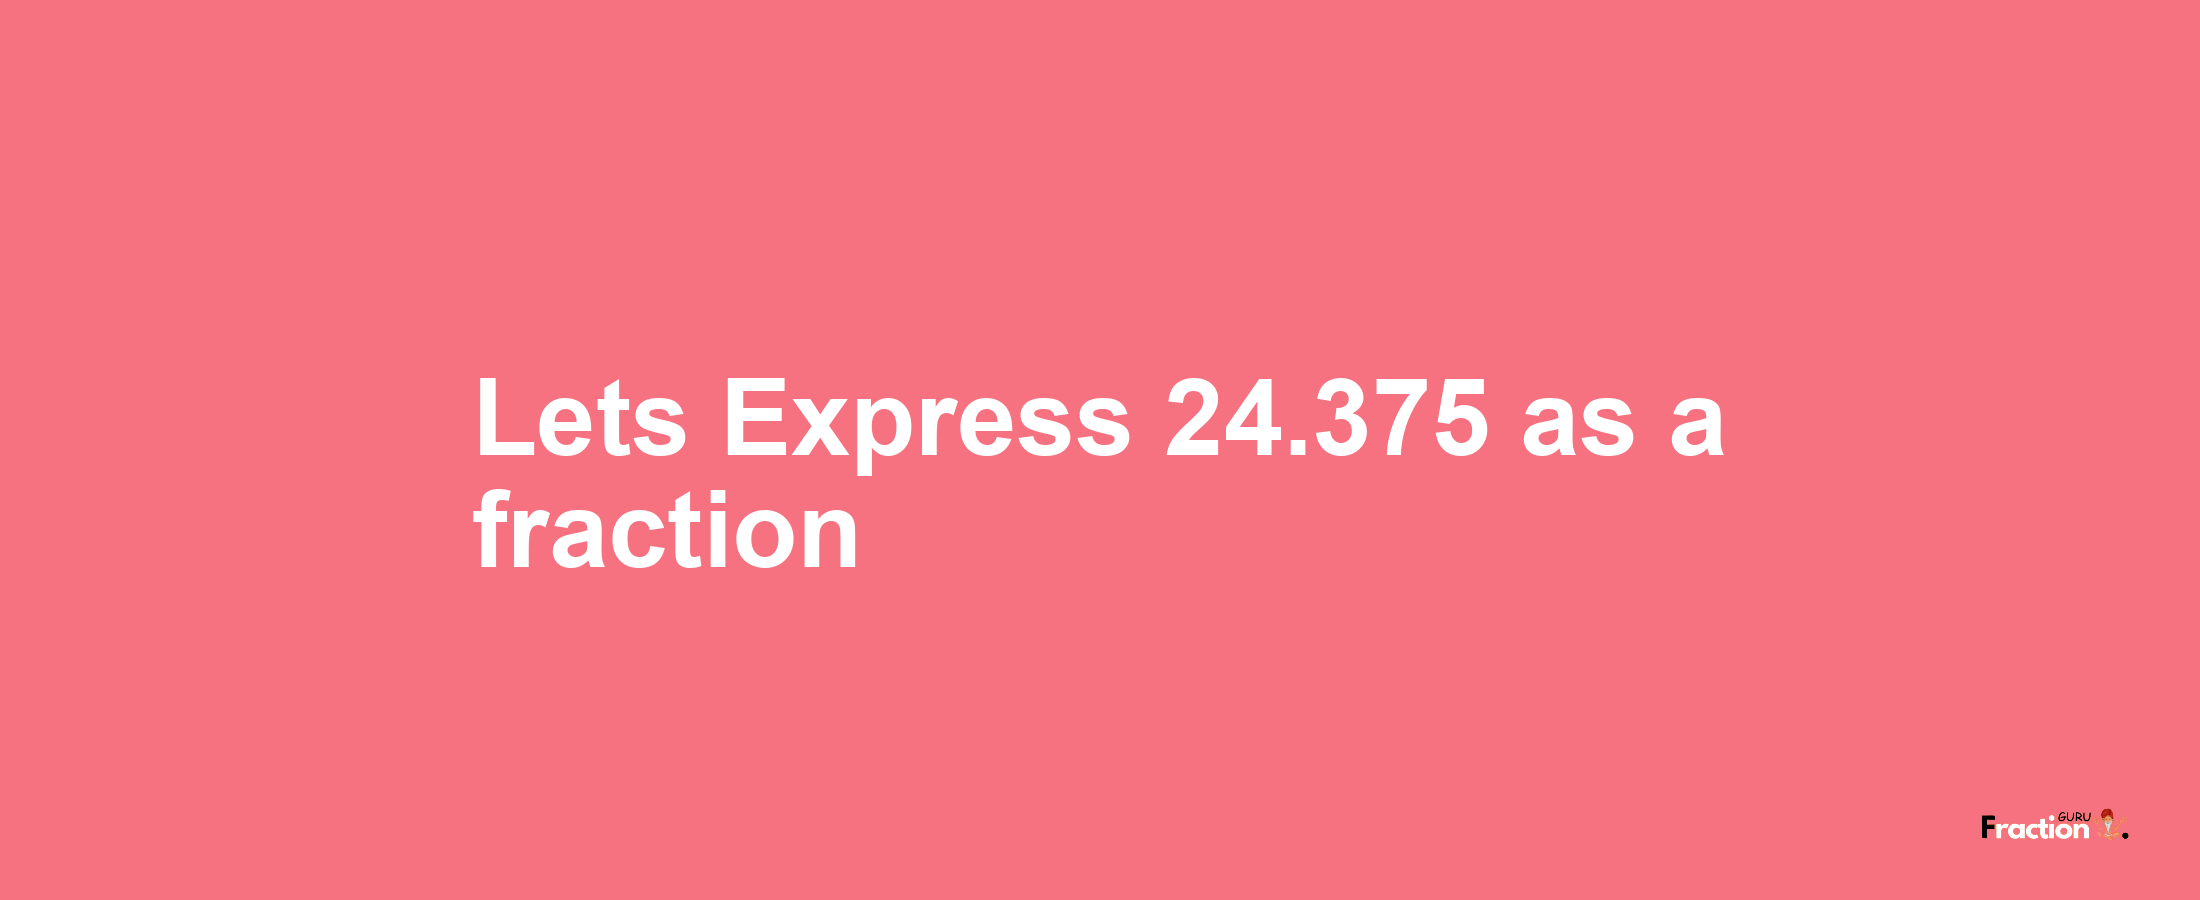 Lets Express 24.375 as afraction